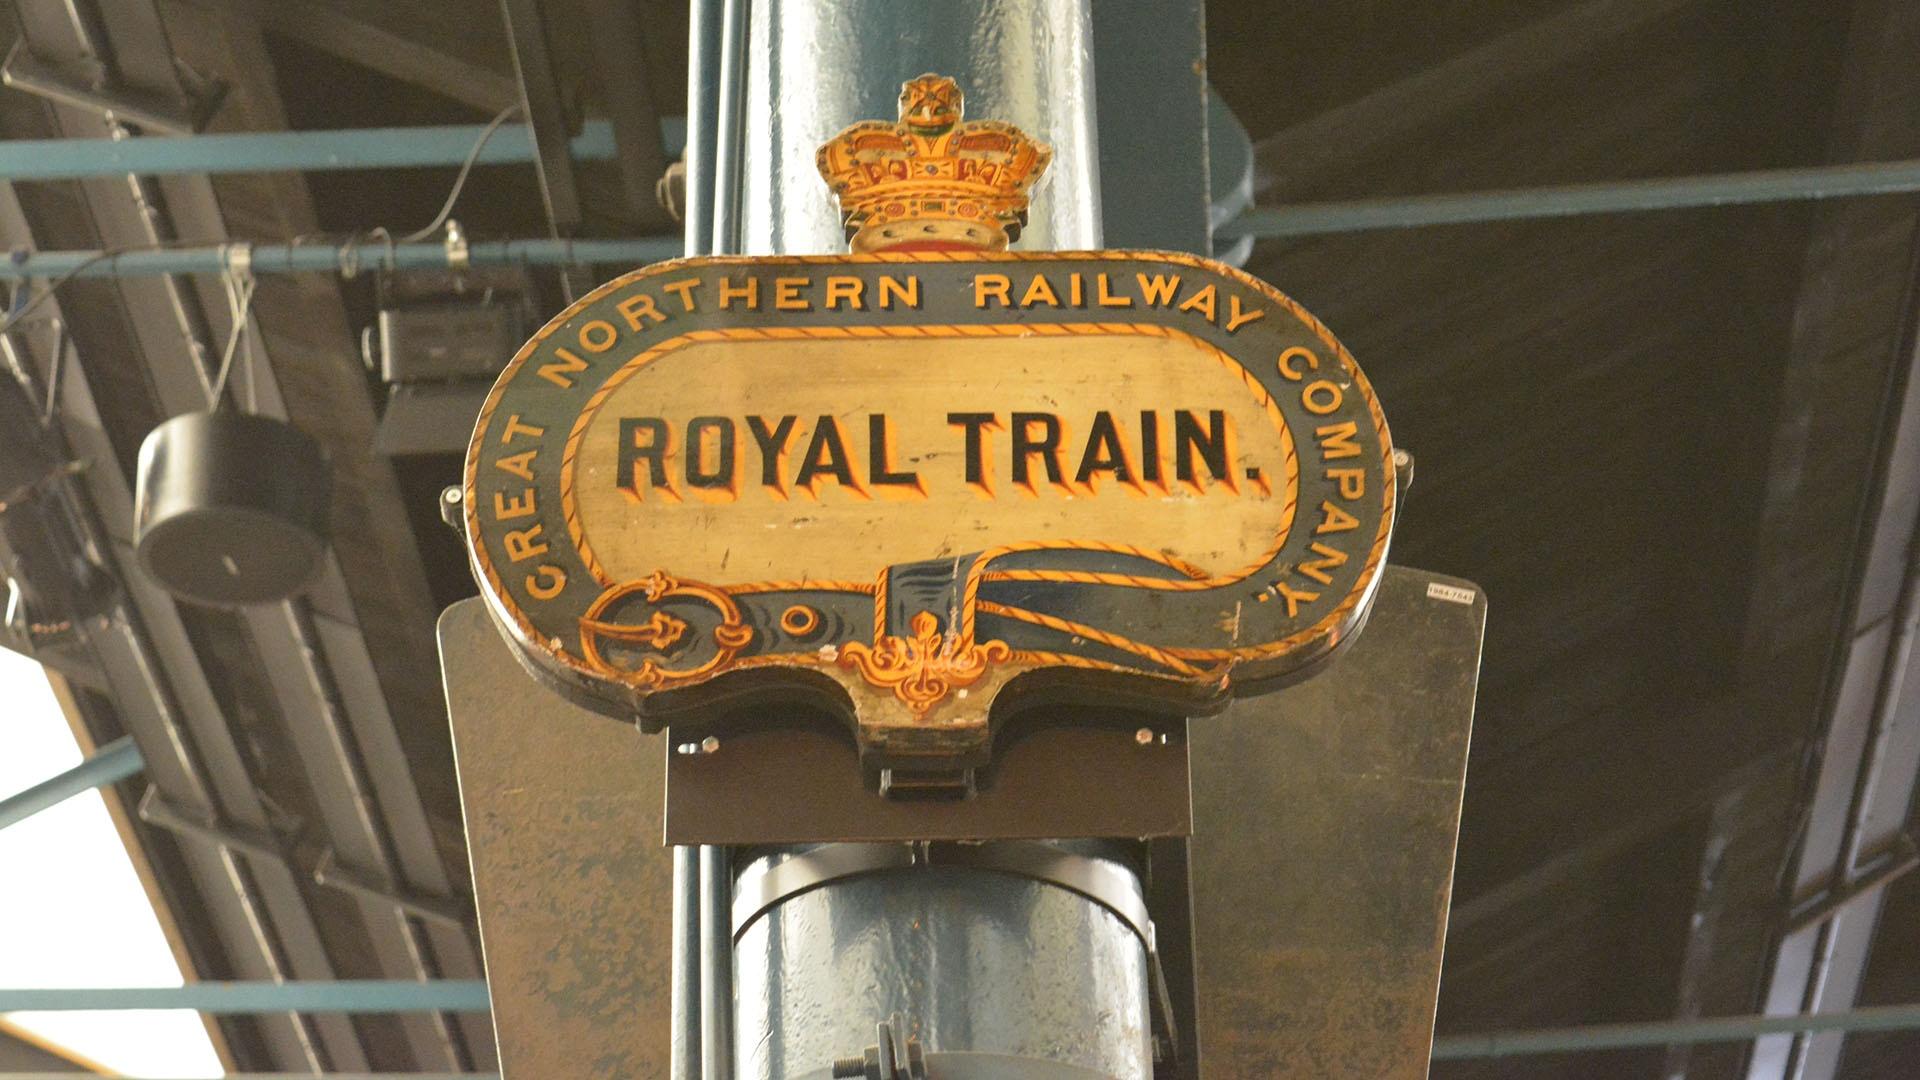 A royal train sign from the National Railway Museum.